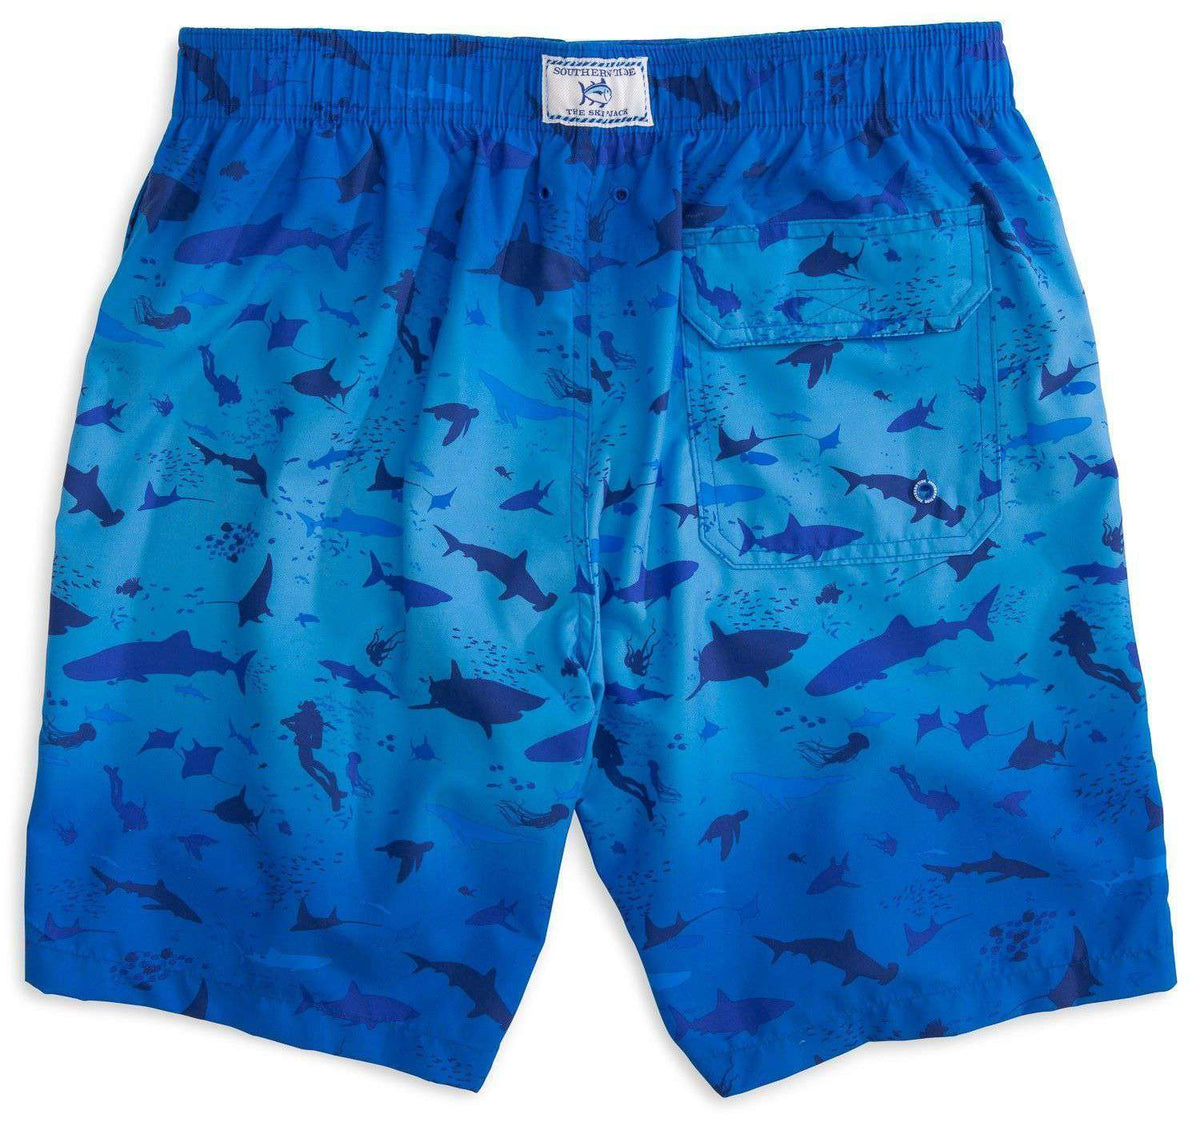 Diver Down Swim Trunks in Blue by Southern Tide - Country Club Prep